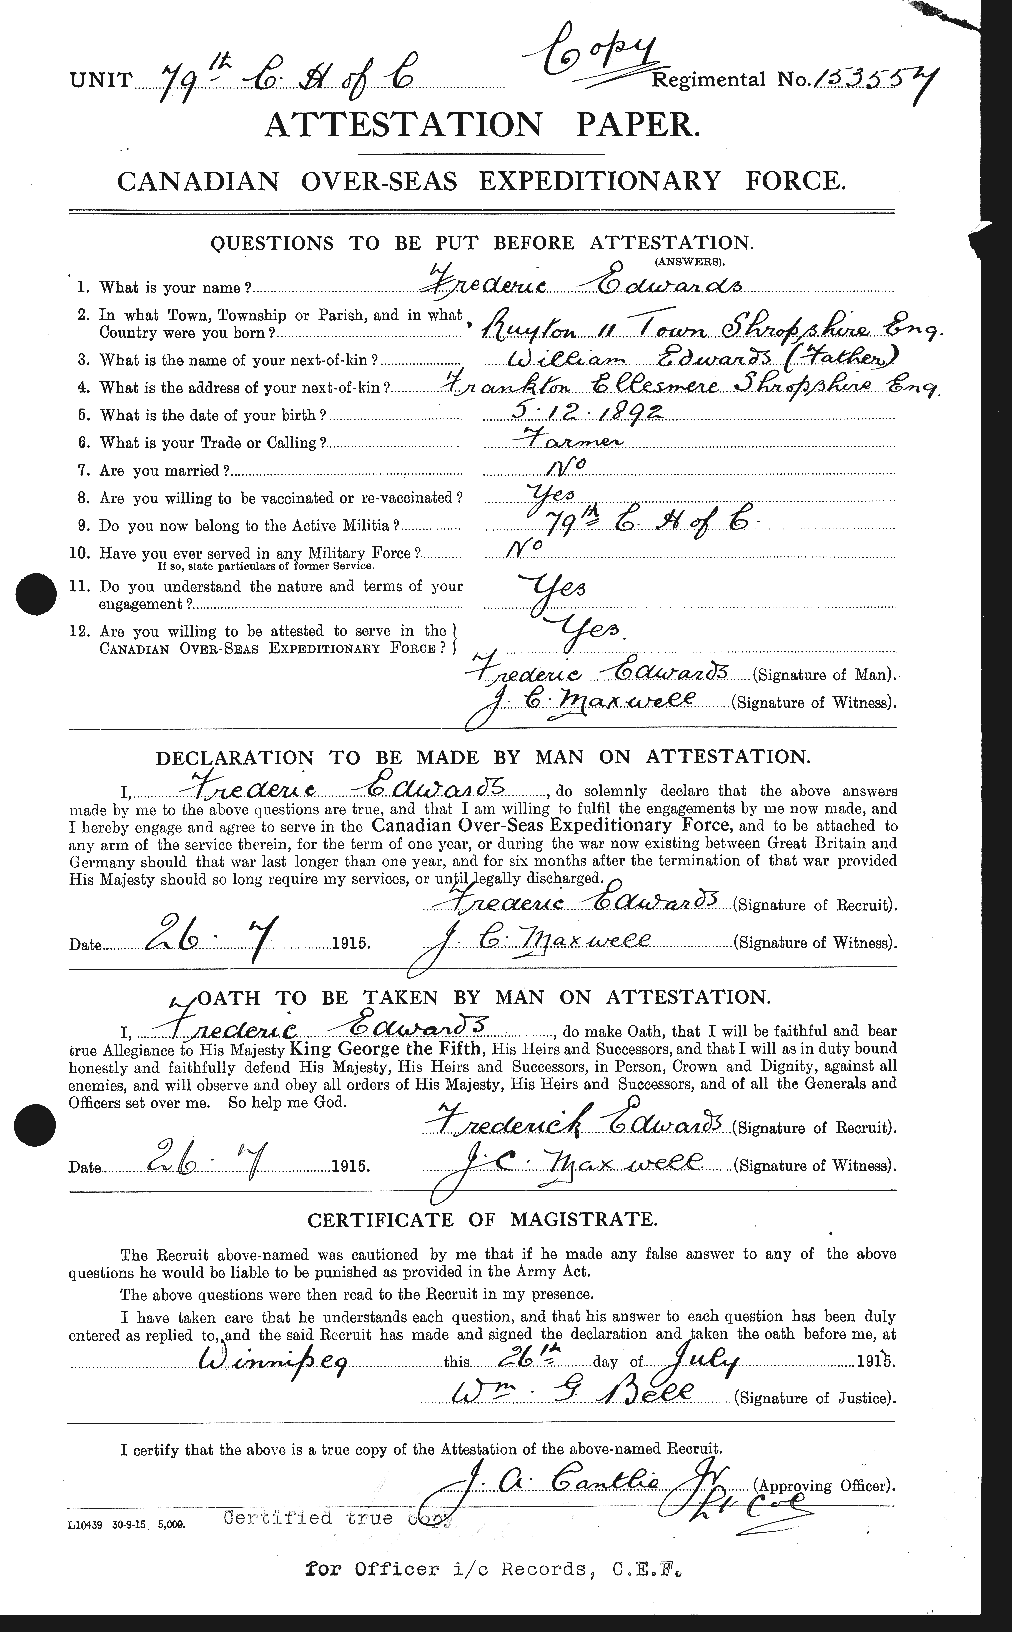 Personnel Records of the First World War - CEF 309063a